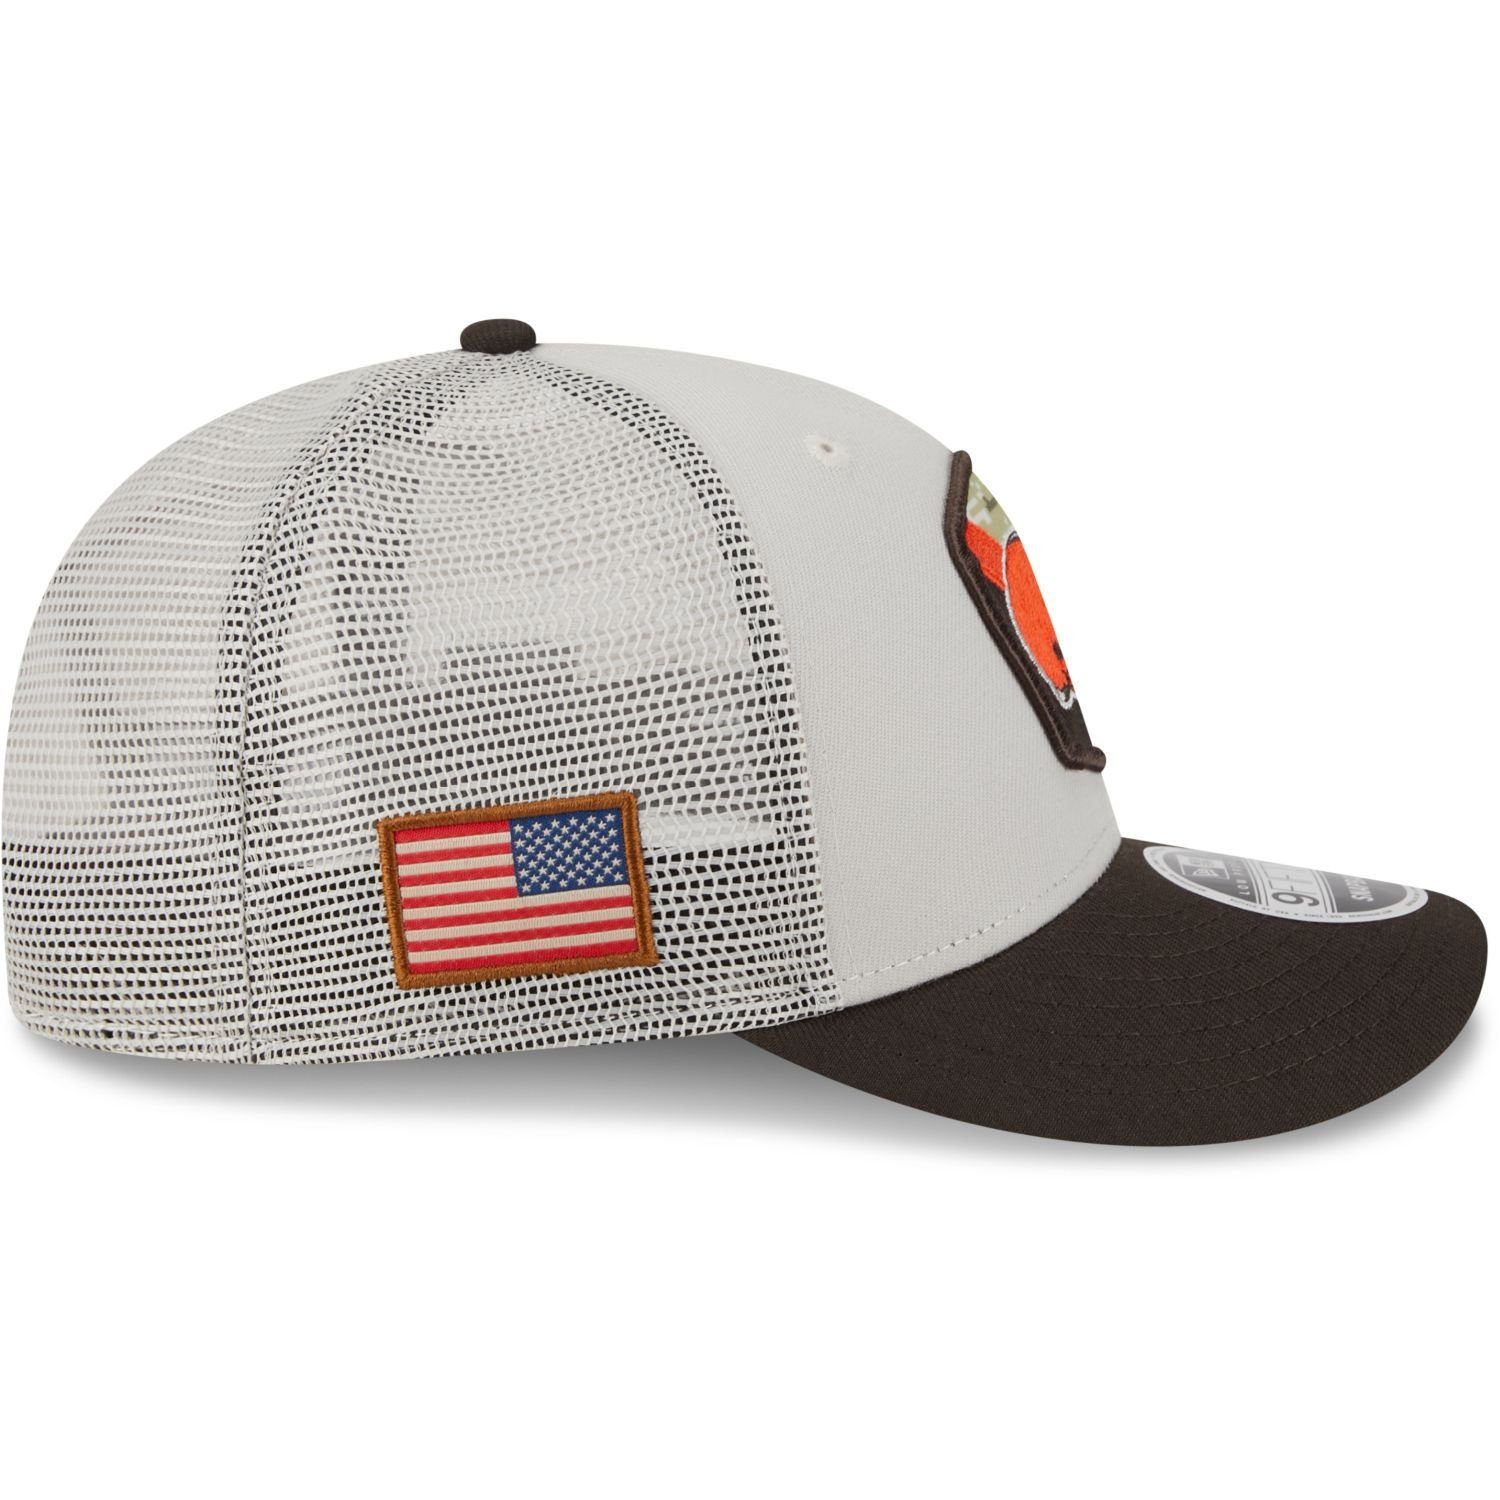 Salute New to Service Snapback Profile Era Low Snap Cleveland Cap 9Fifty Browns NFL